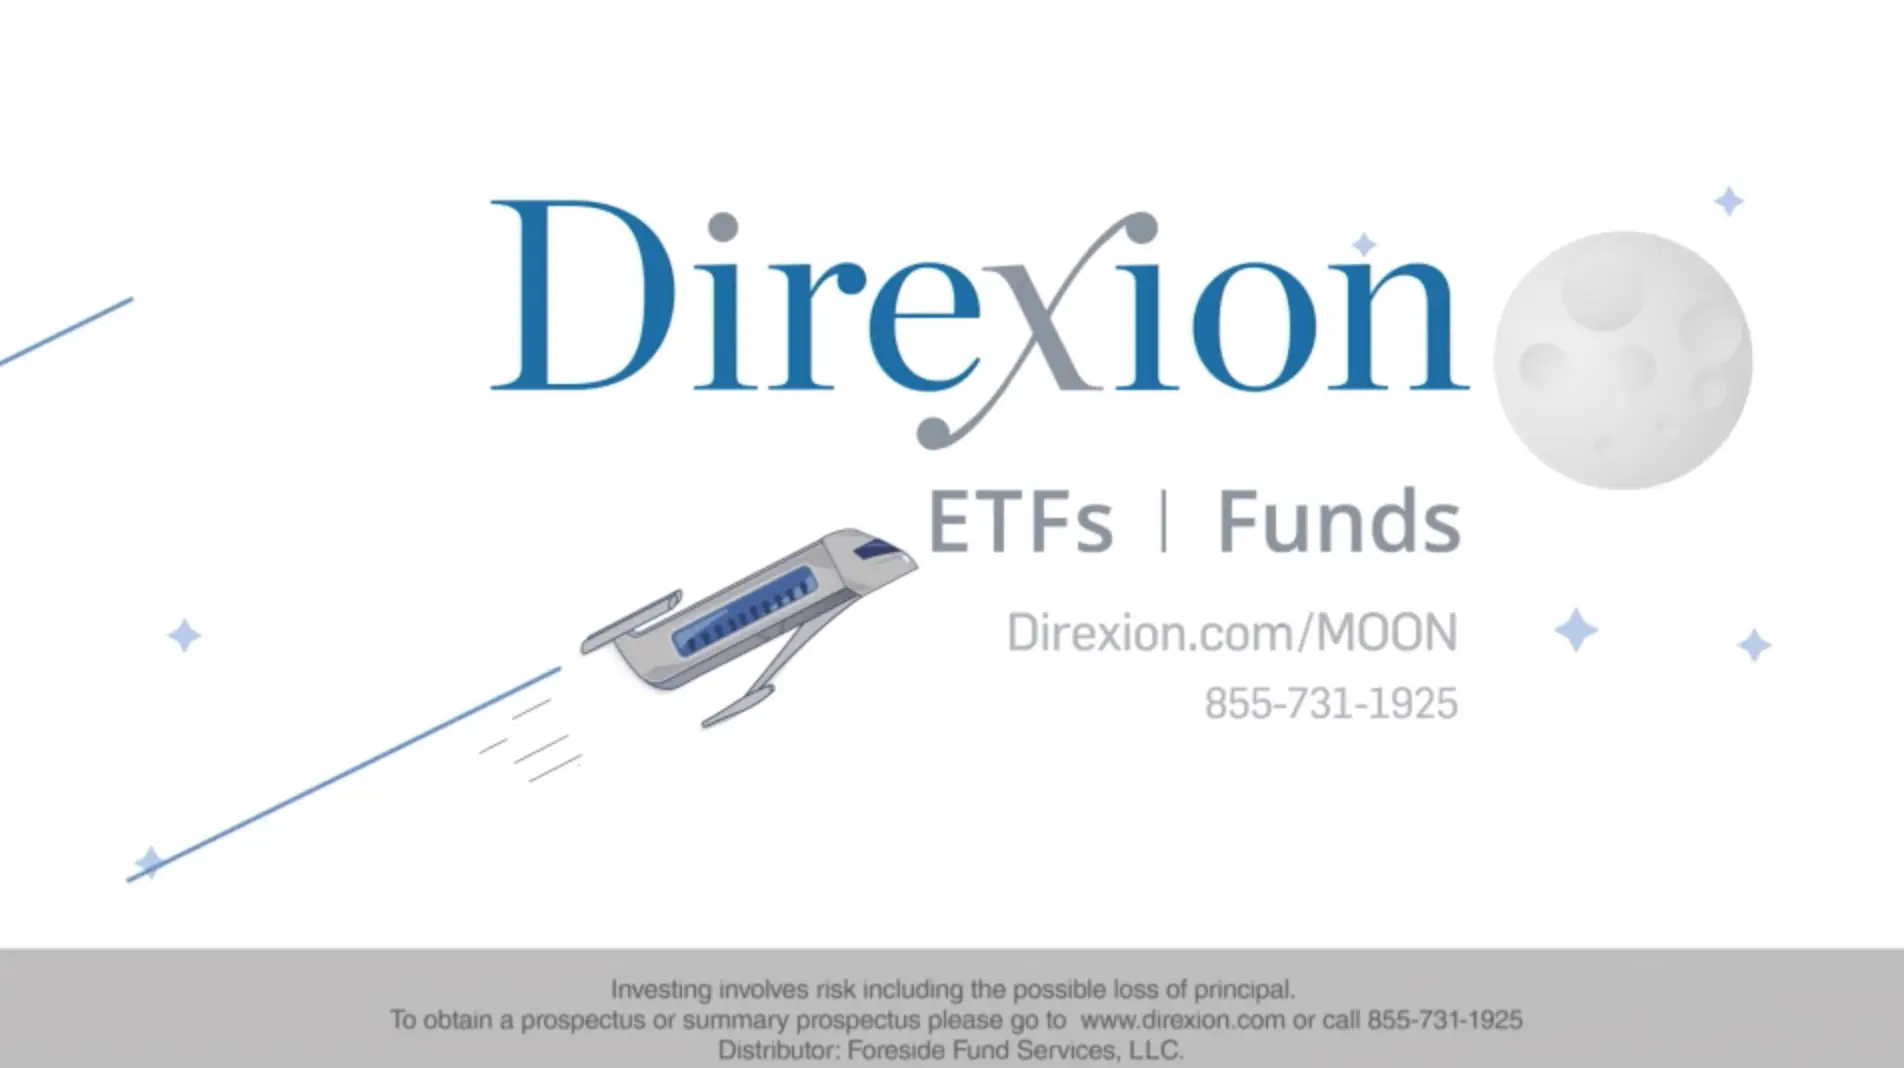 The logo for Direxion ETFs funds, featured in our Client Case Study.